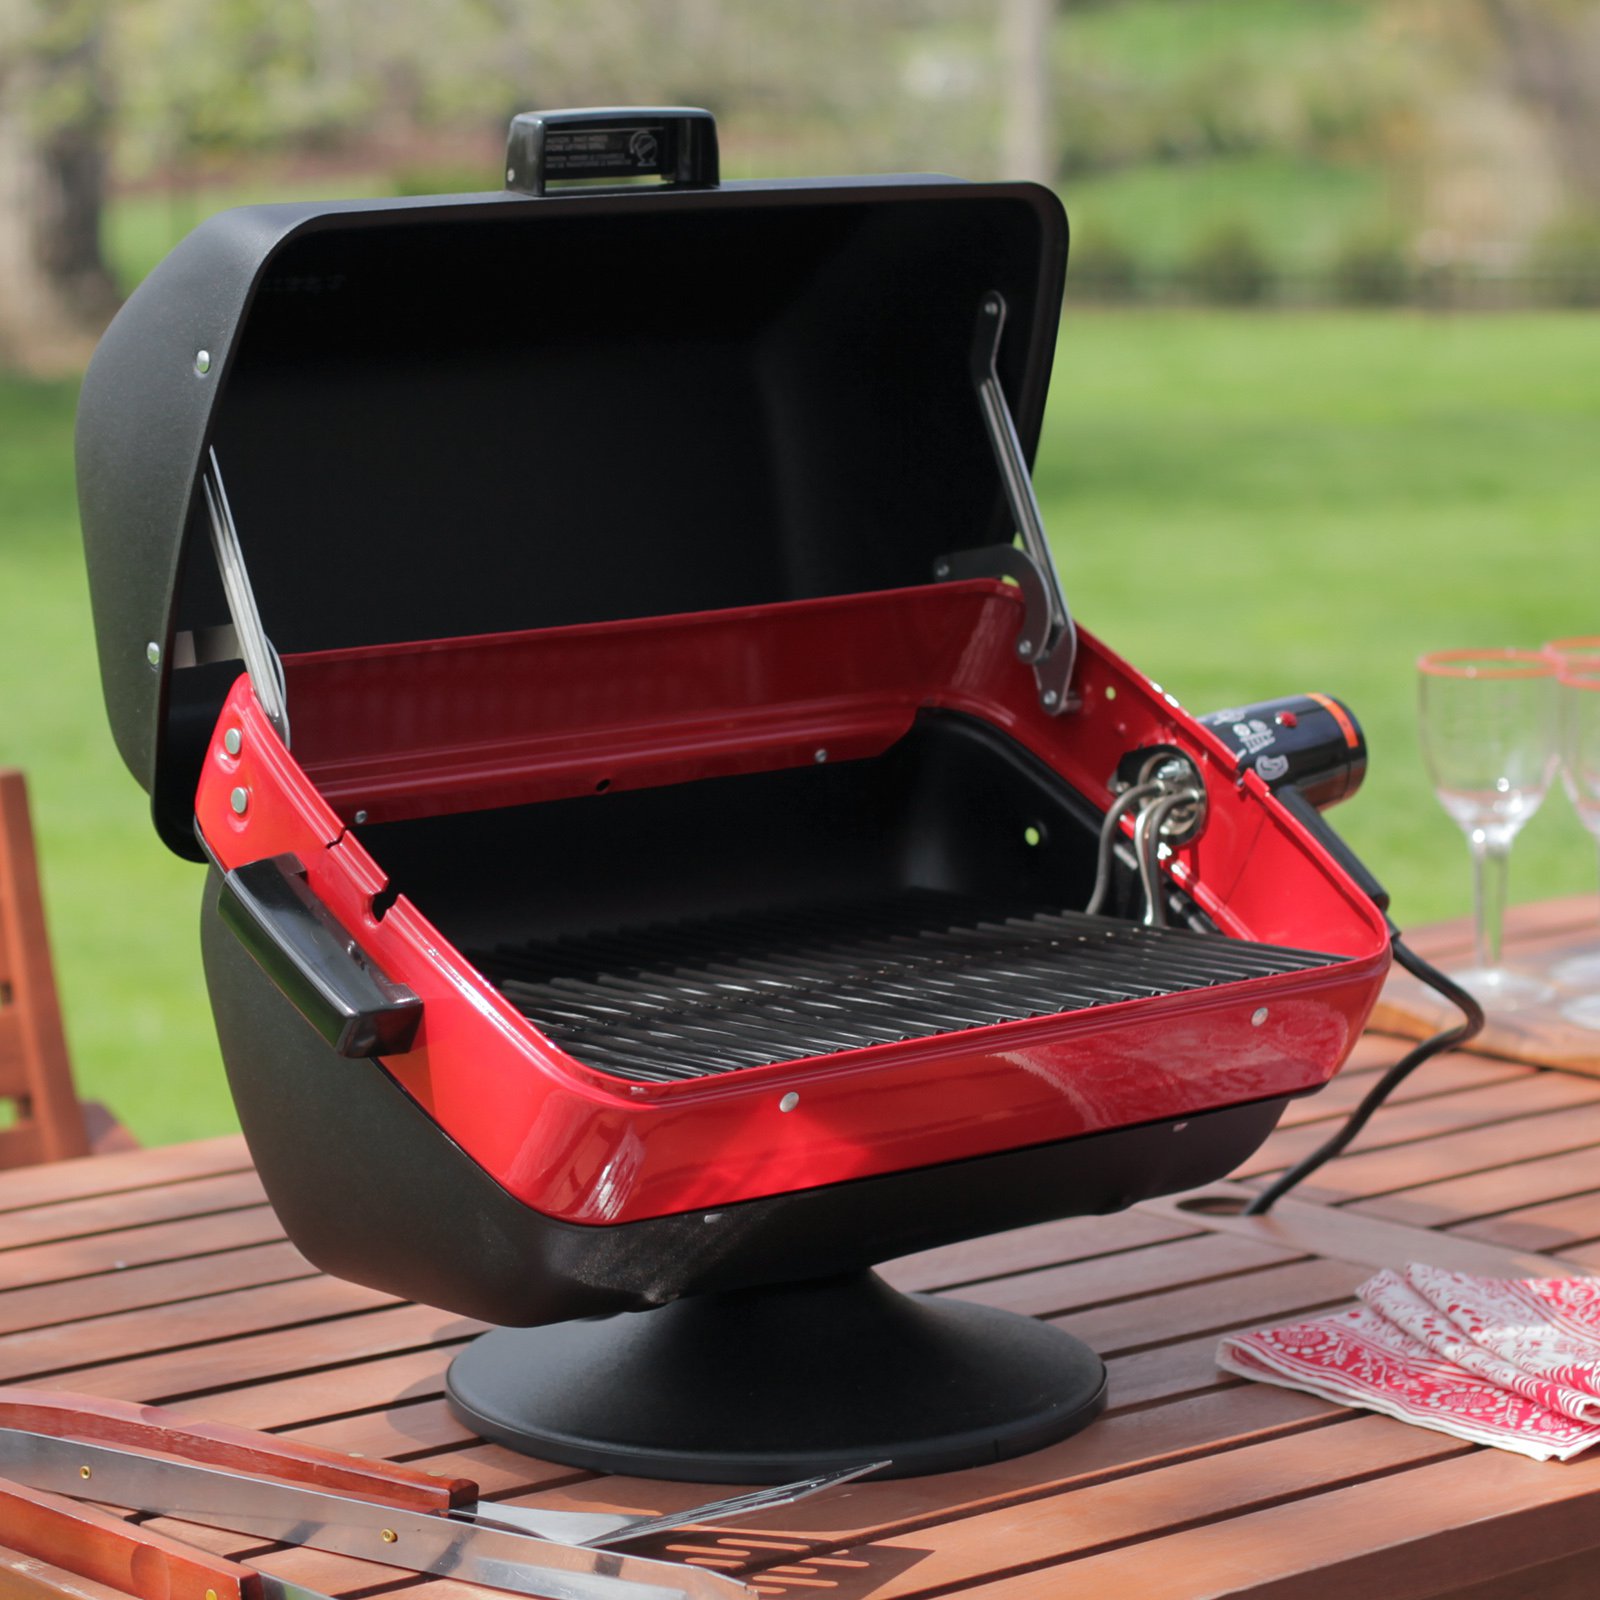 Americana Tabletop Grill with 3-position element - image 4 of 5